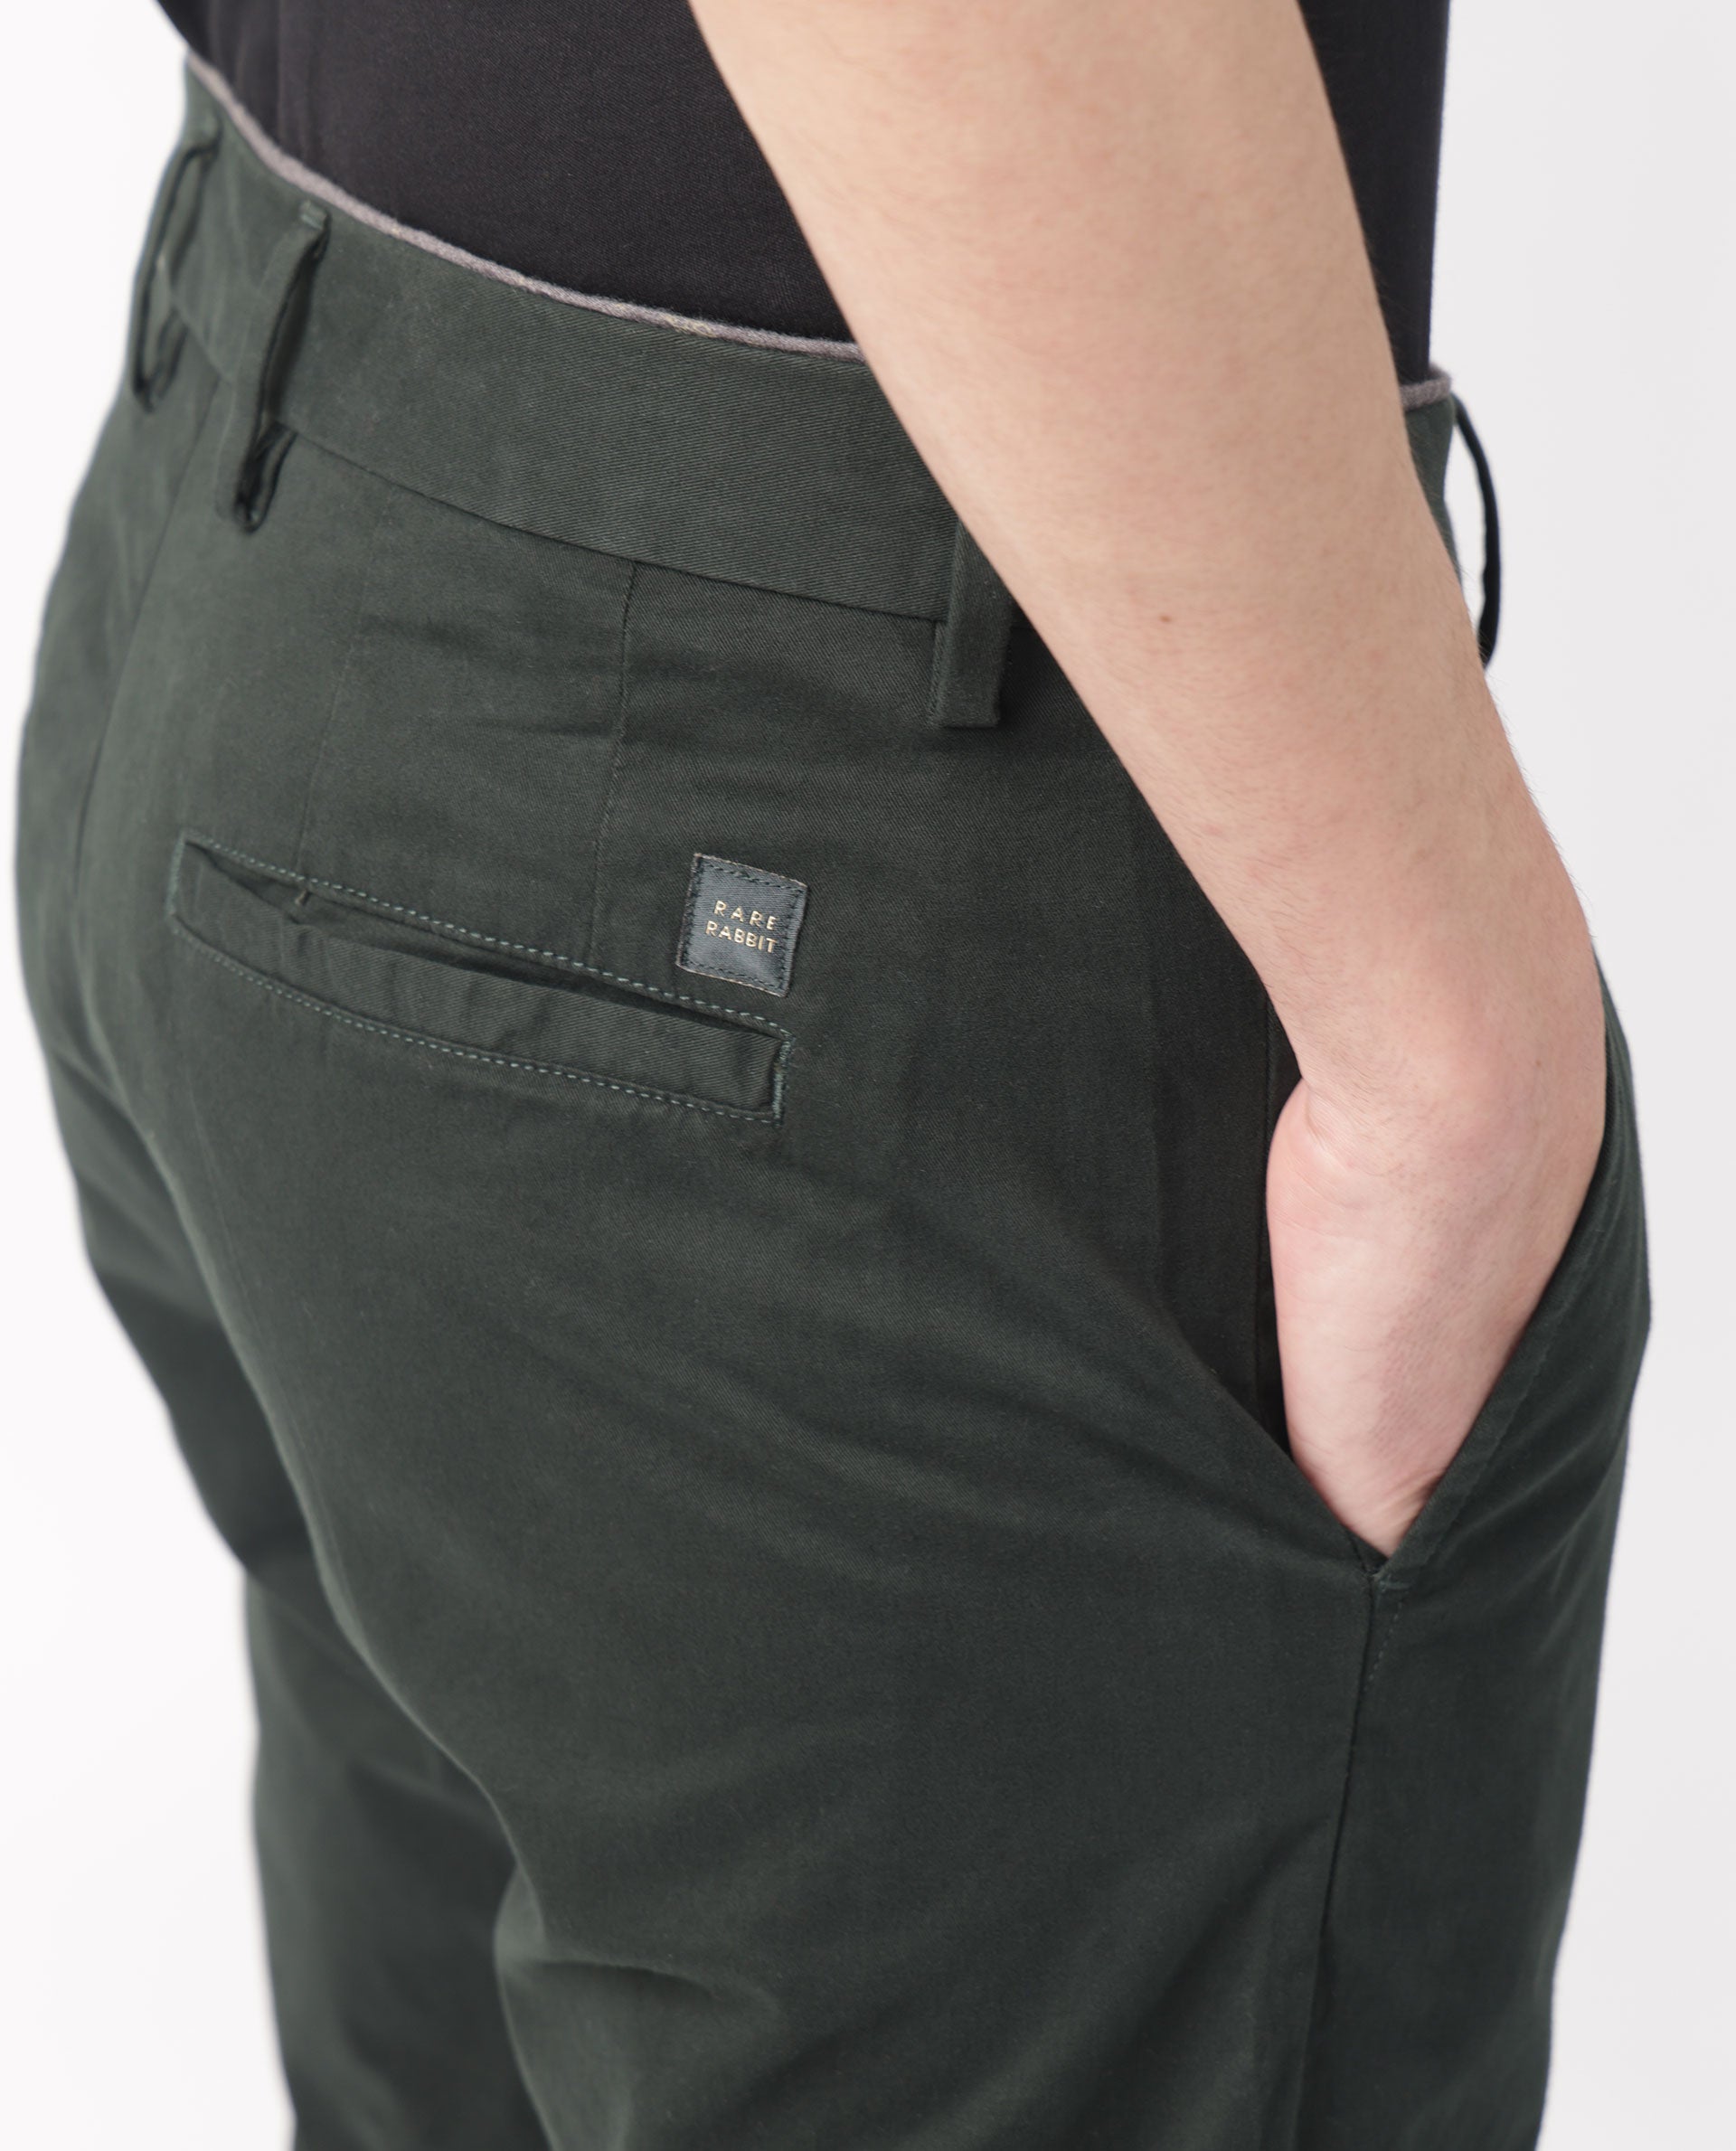 Latest RARE RABBIT Cargo Trousers & Pants arrivals - Men - 1 products |  FASHIOLA.in